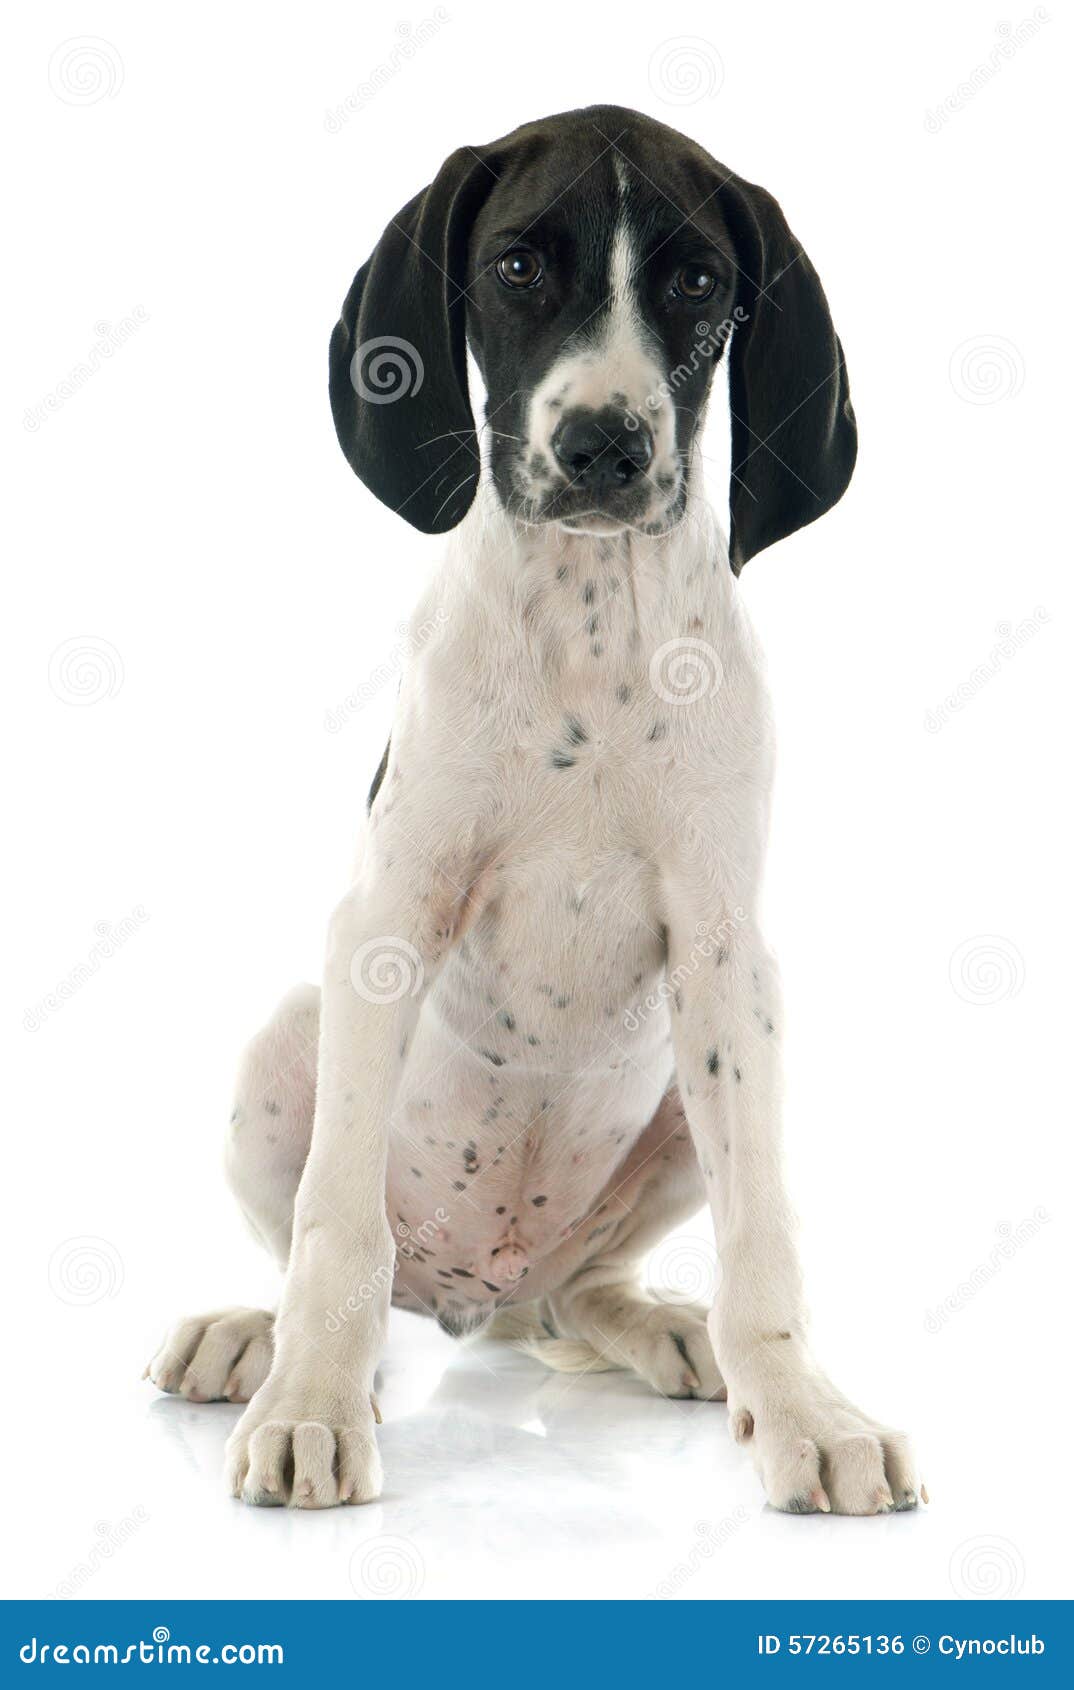 31 Poitevin Dog Photos Free Royalty Free Stock Photos From Dreamstime